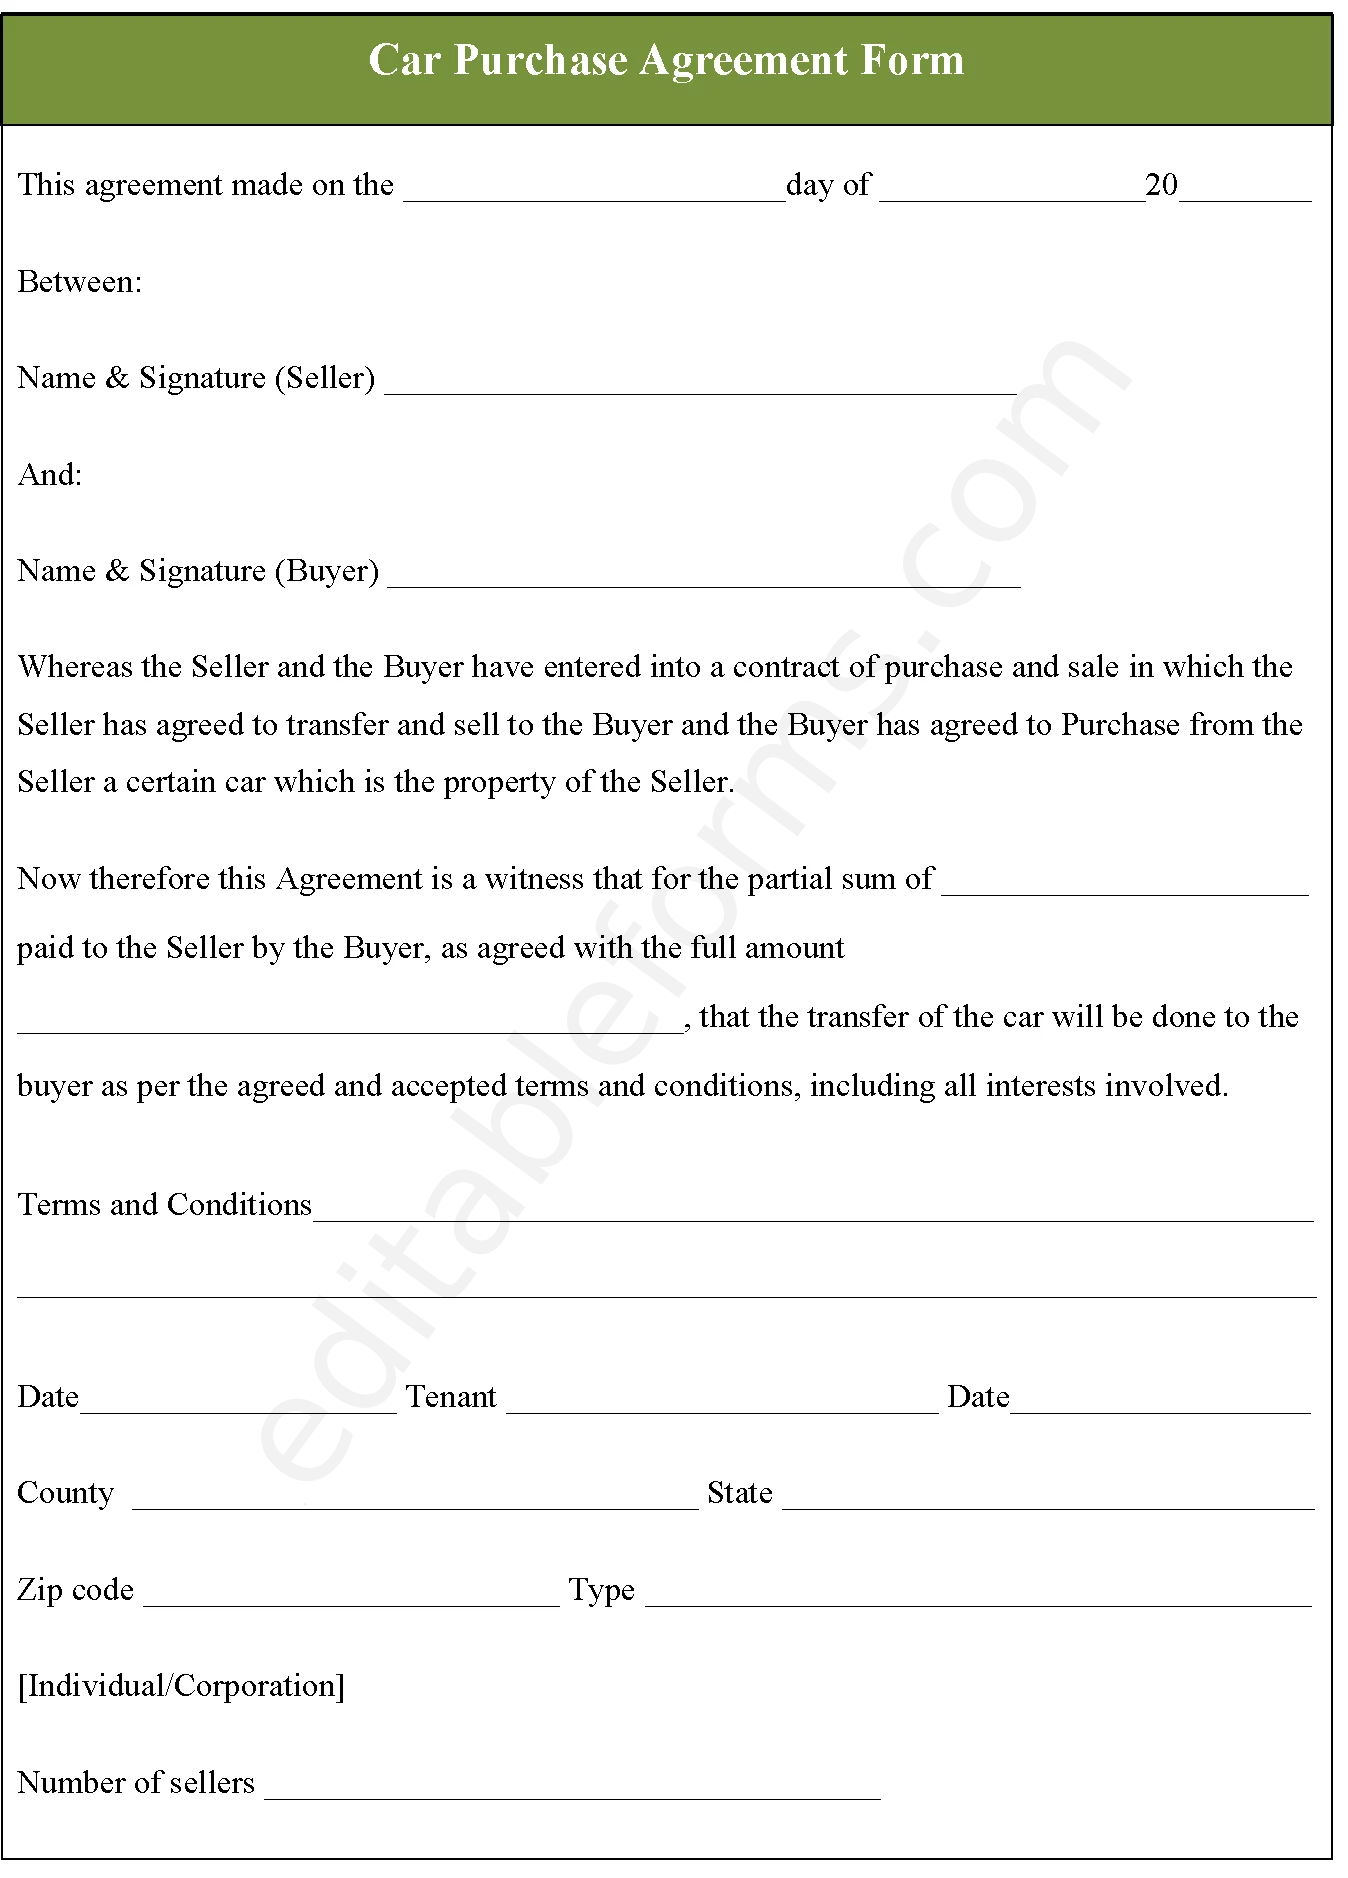 Car Purchase Agreement Fillable PDF Template